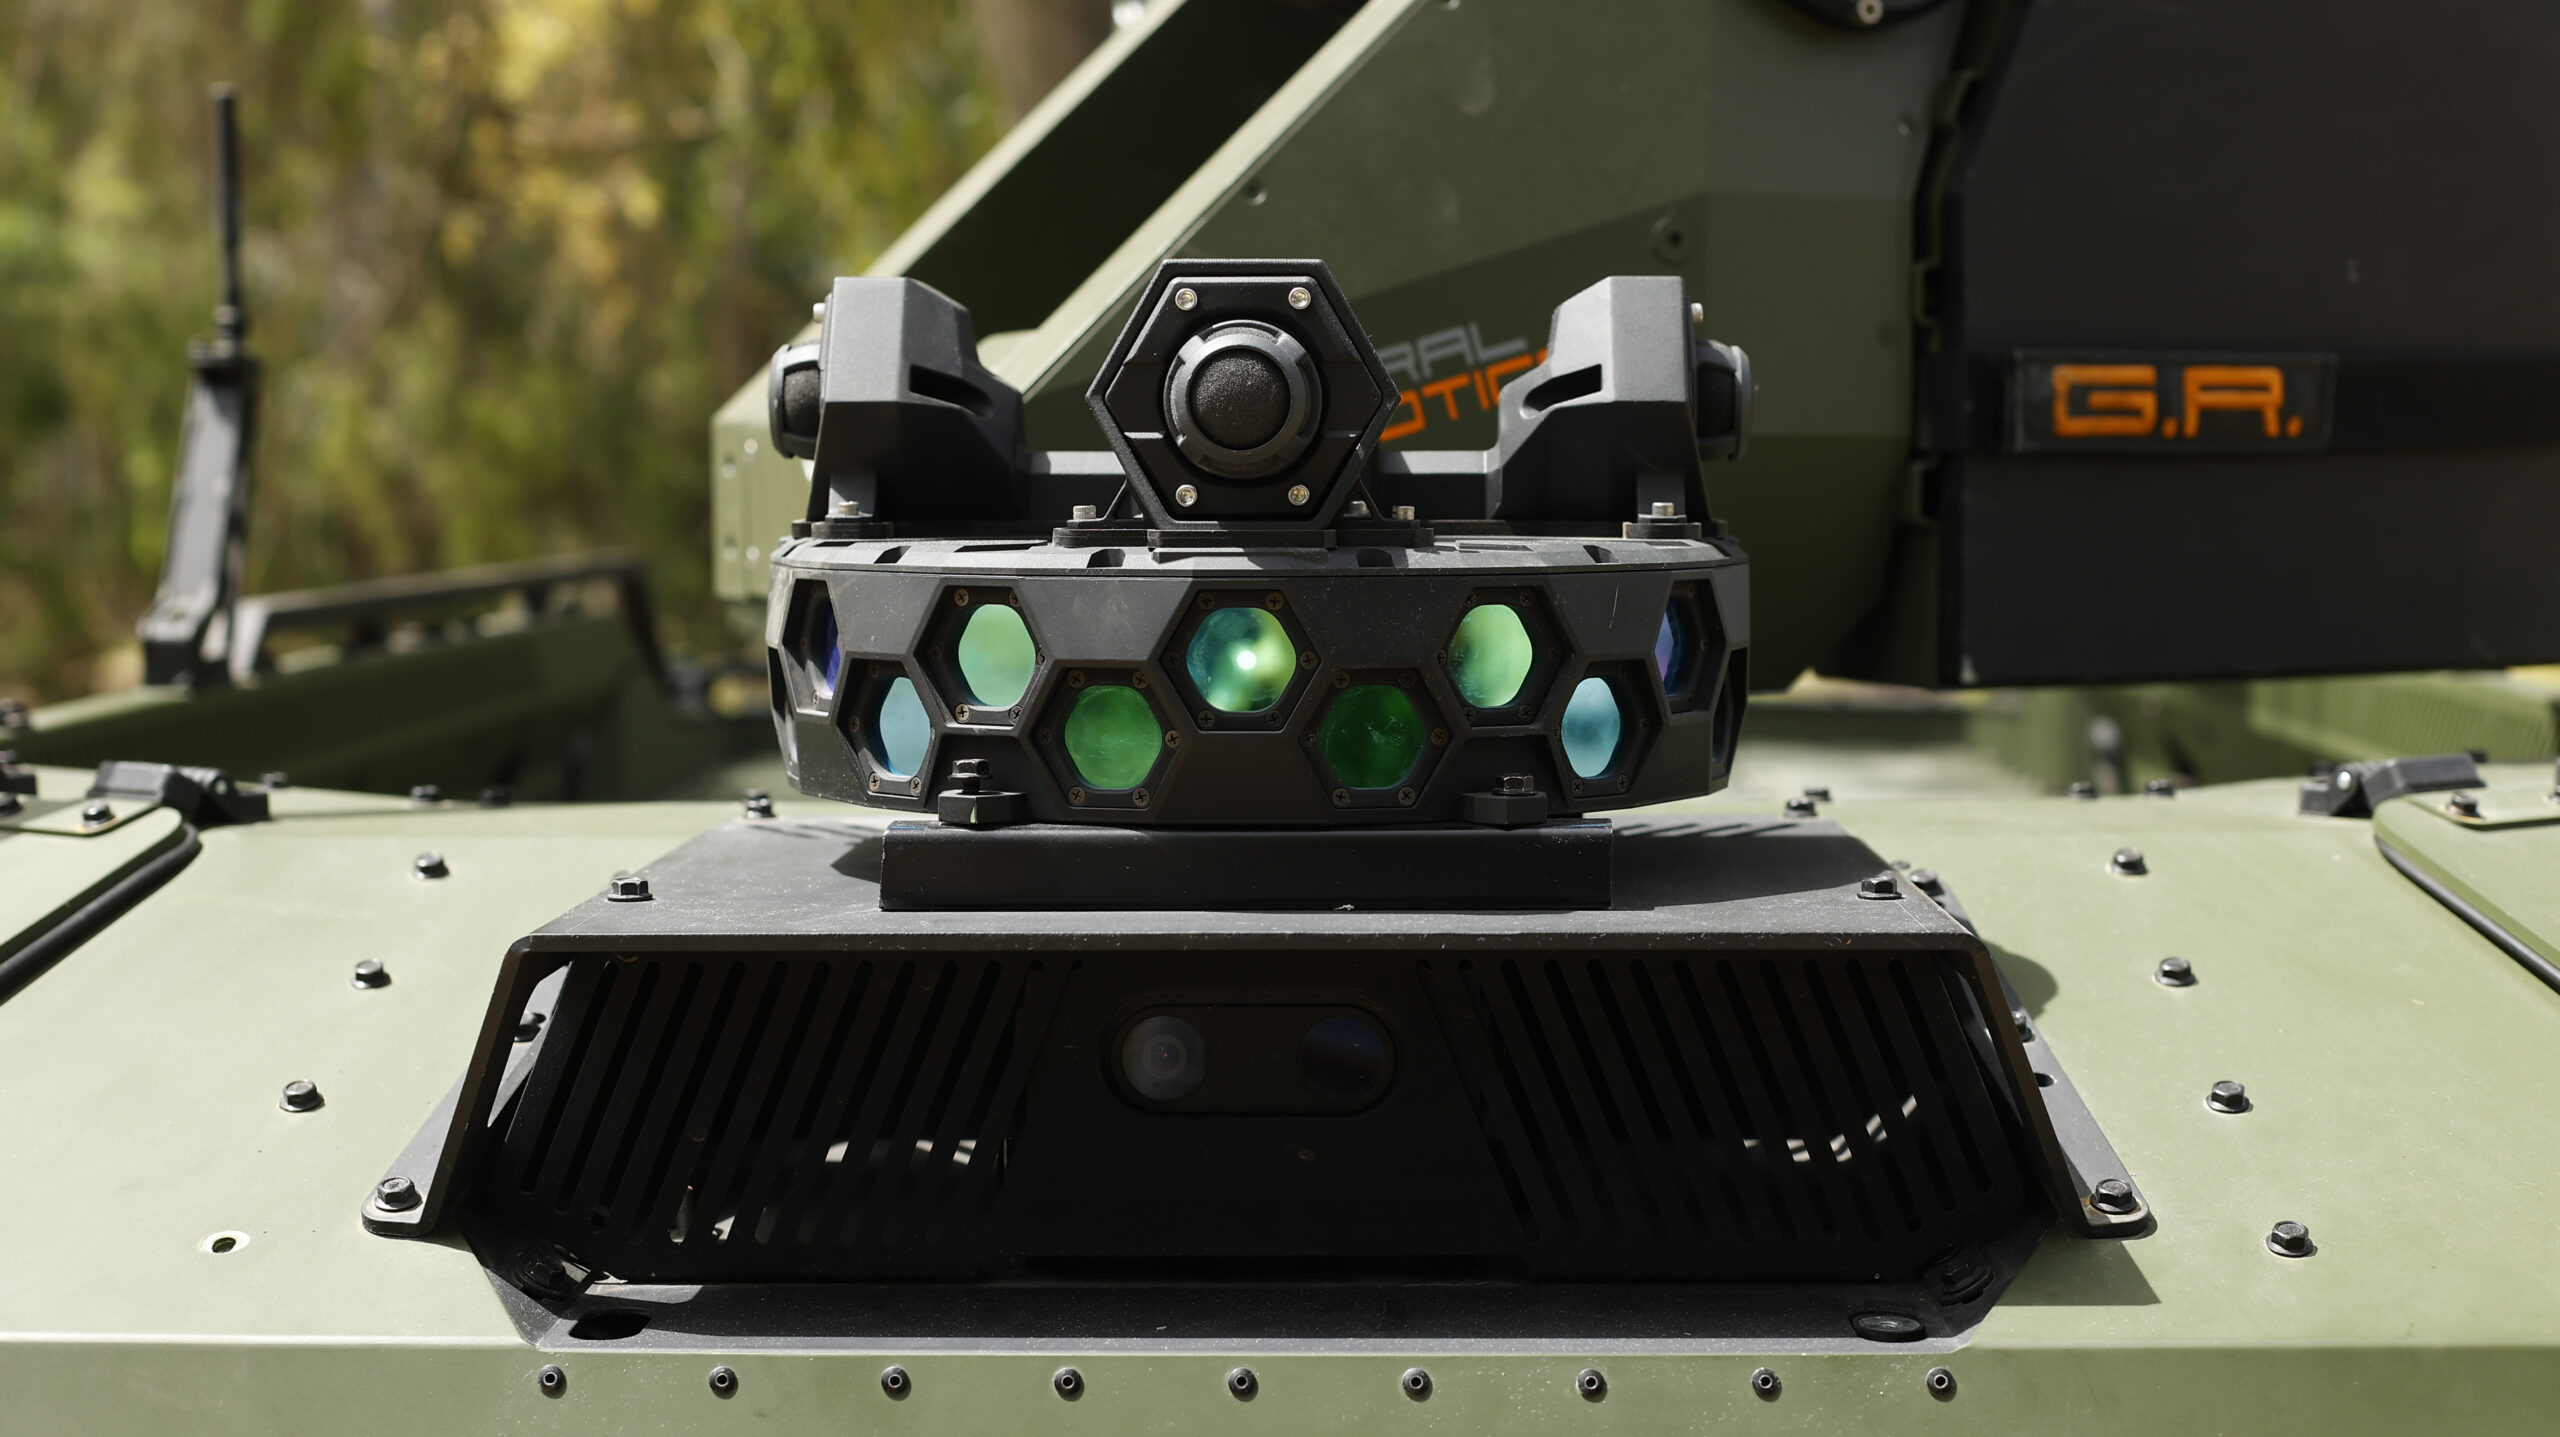 Israel’s IAI unveils newest Othello gunfire detection system to geo-locate threats